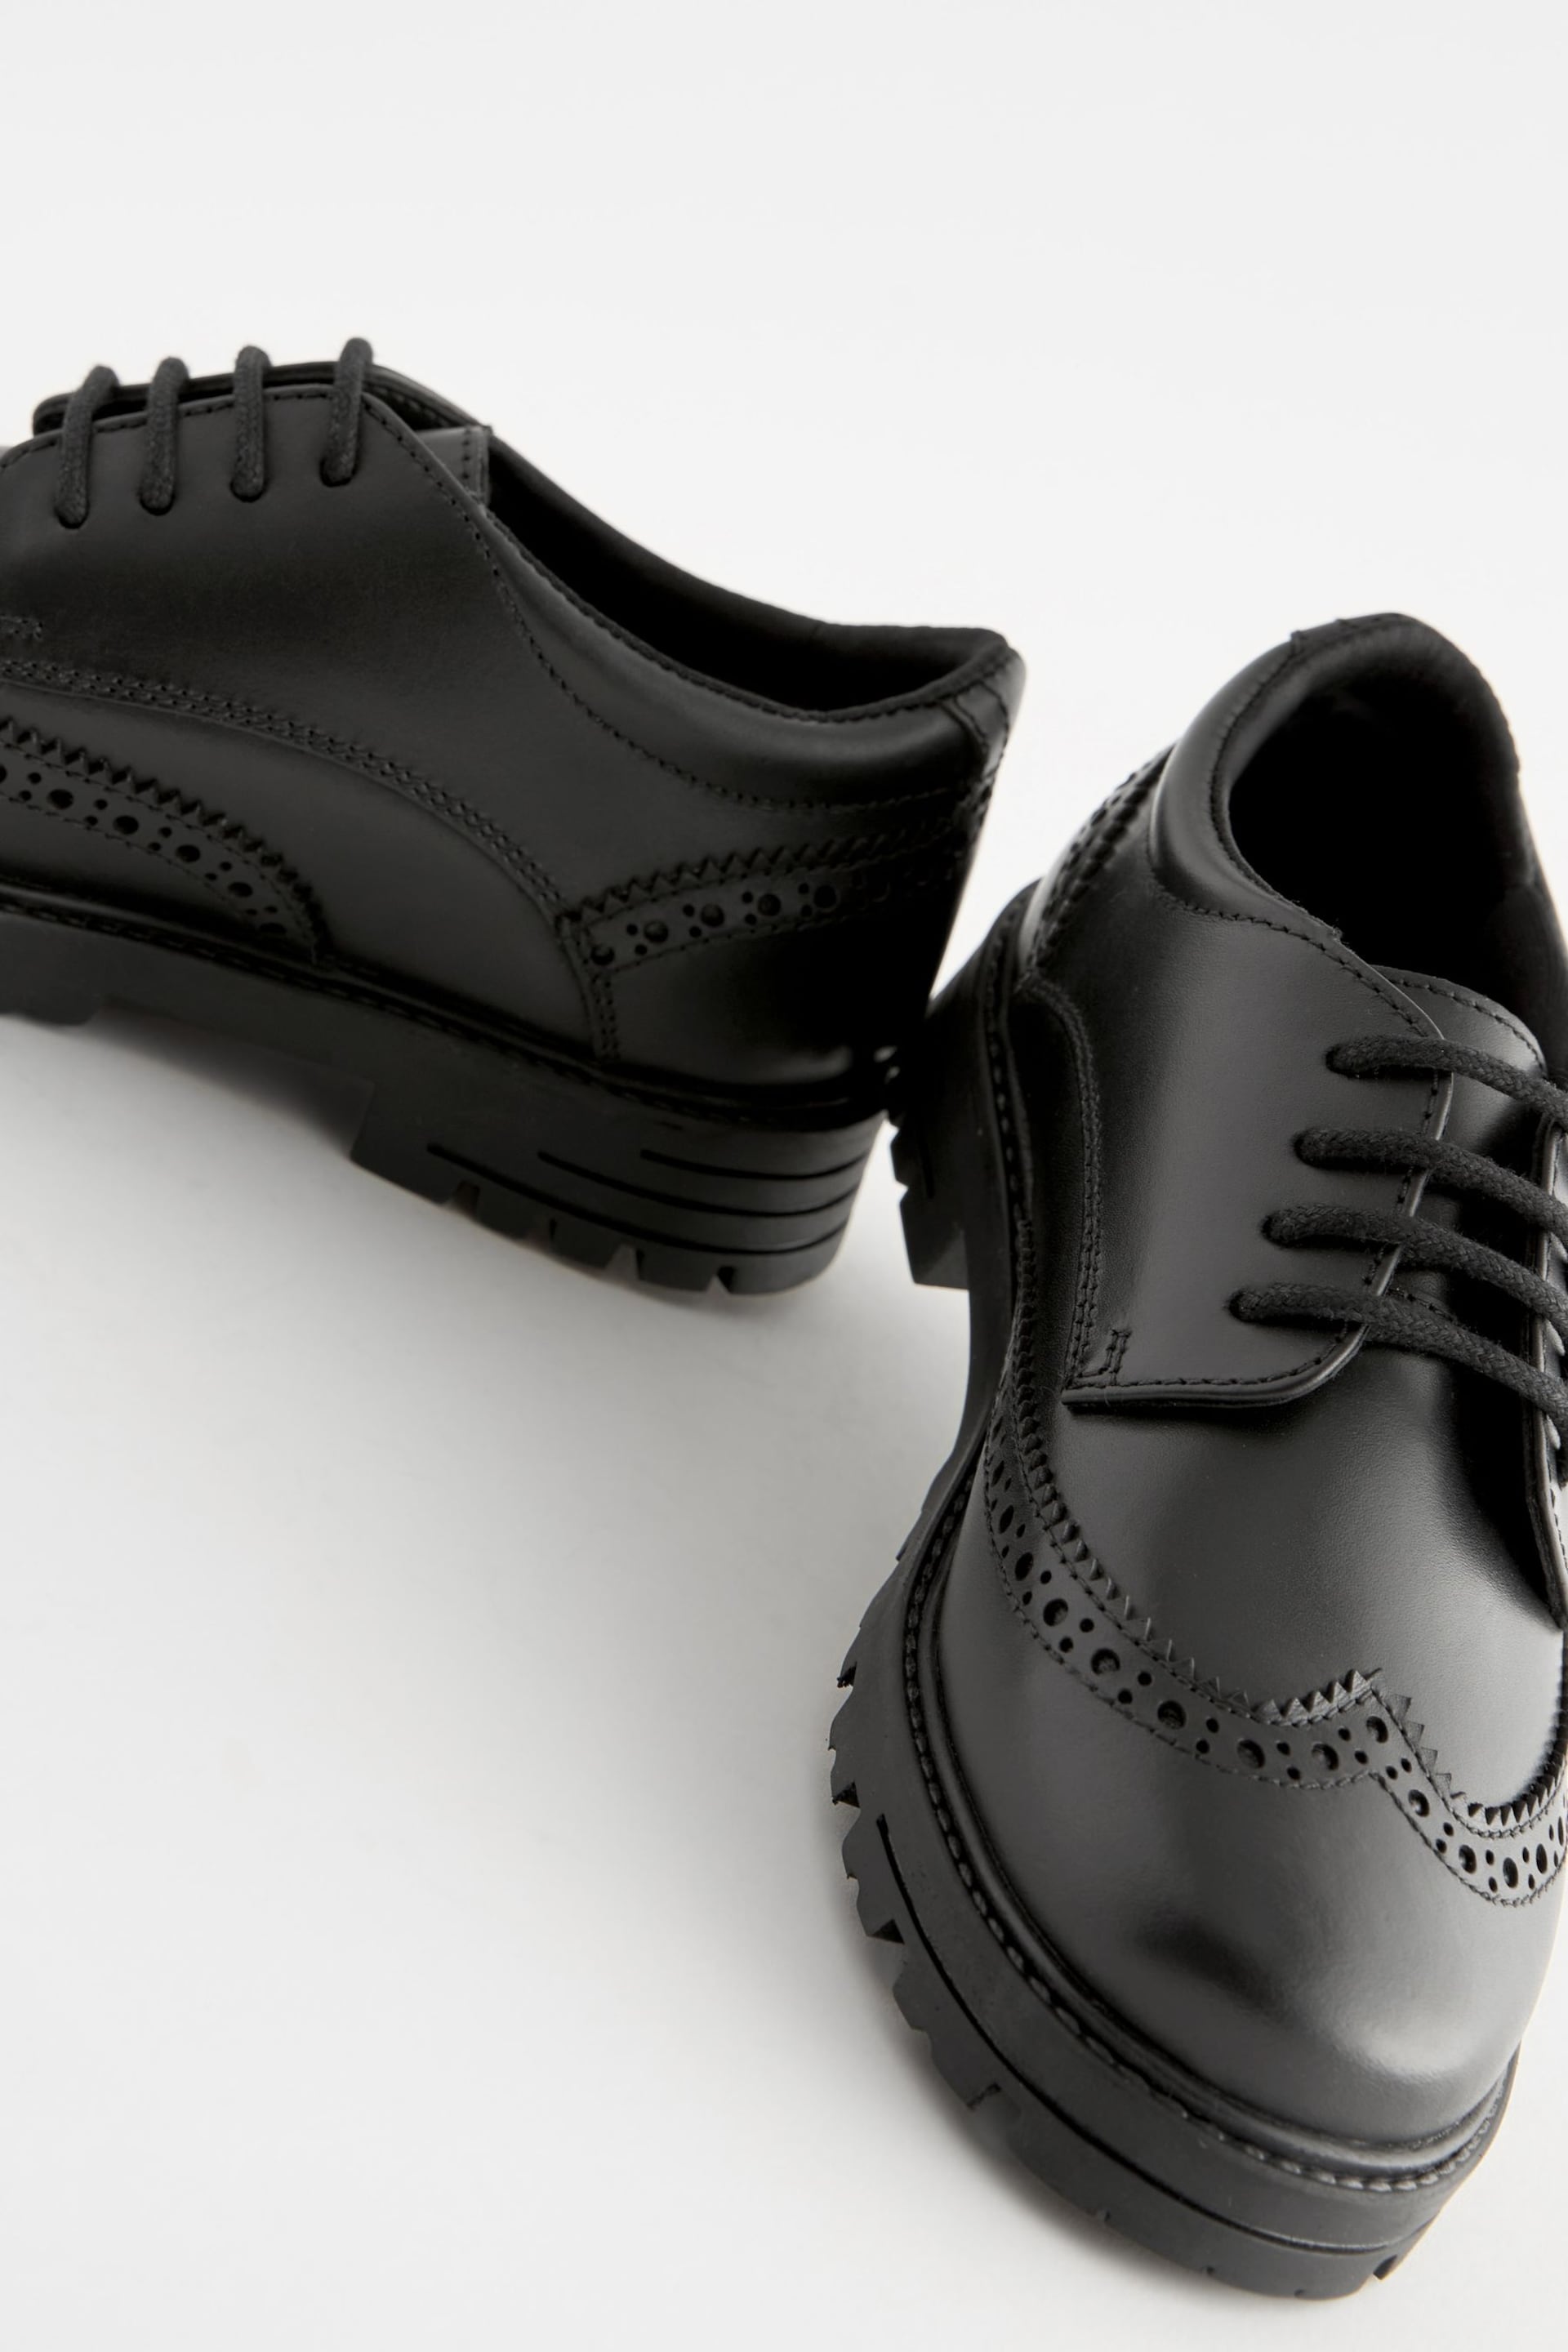 Black Wide Fit (G) School Leather Chunky Lace-Up Brogues - Image 10 of 10